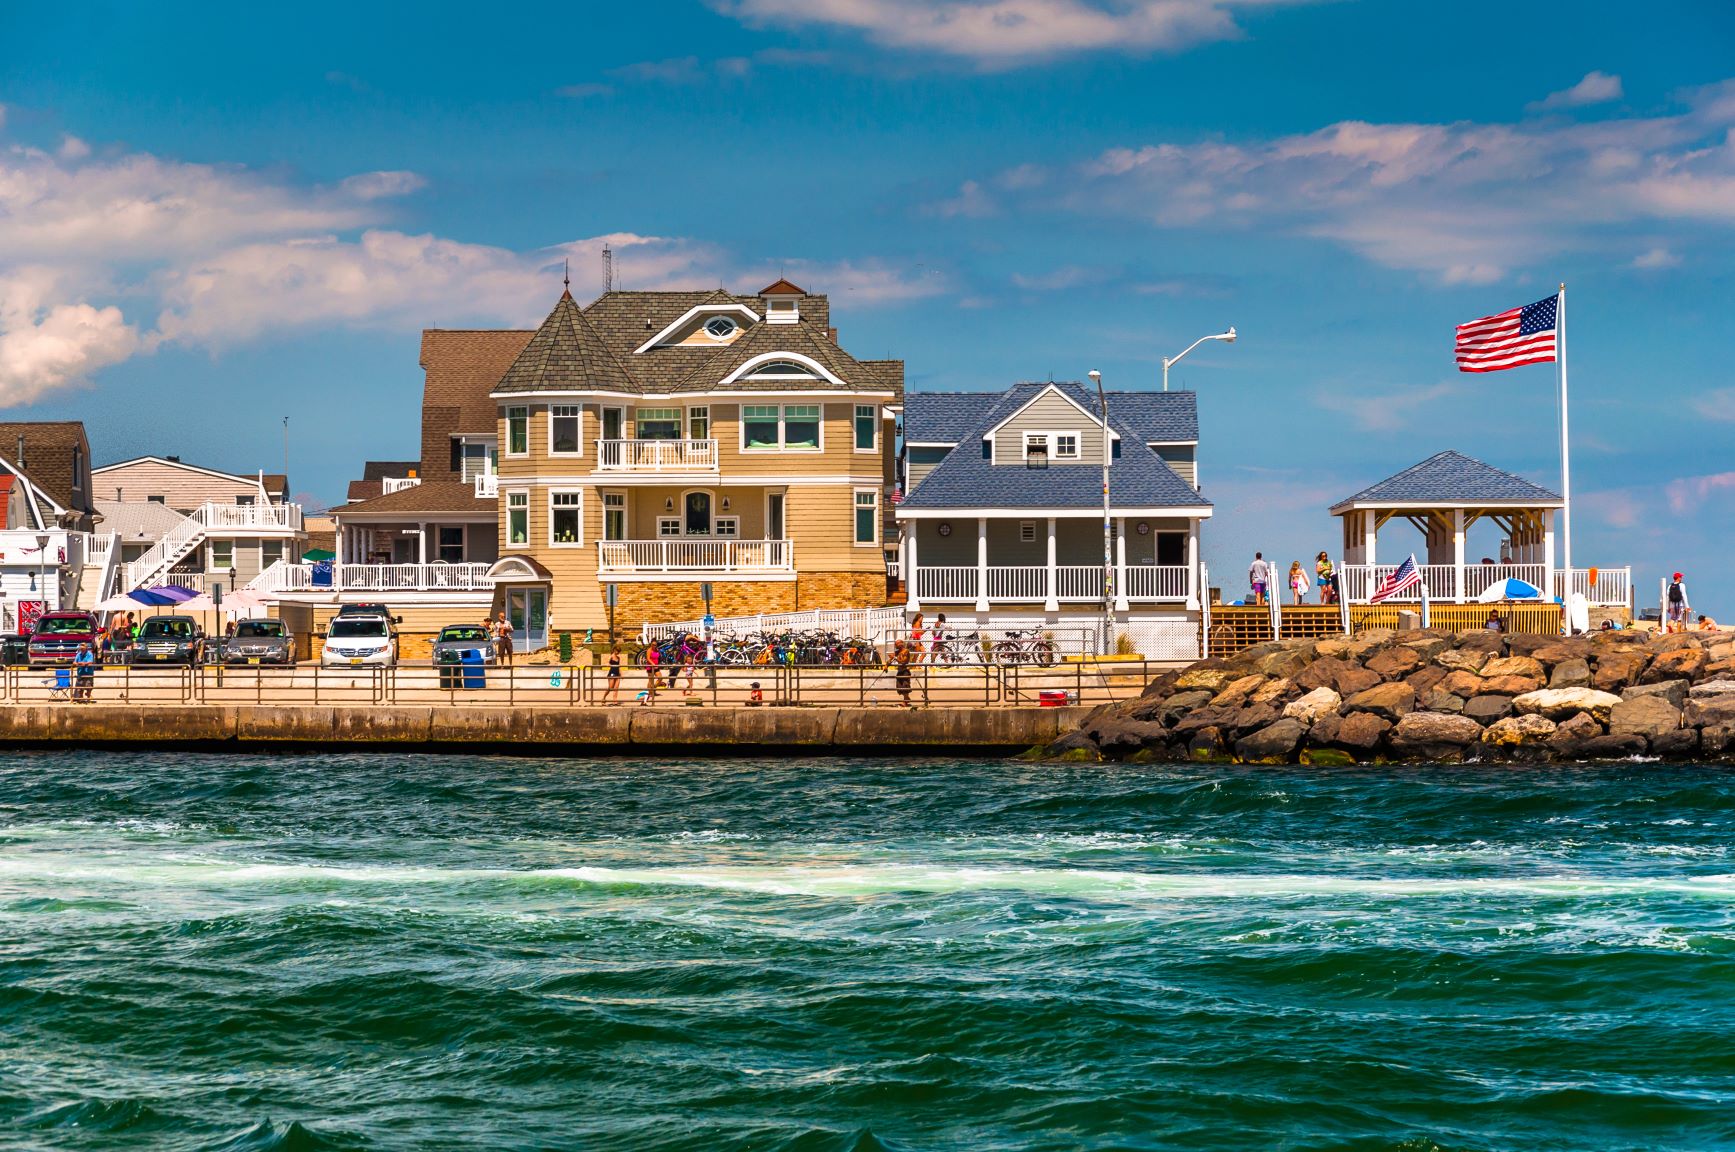 Is It Obtainable To Own A Beach House?